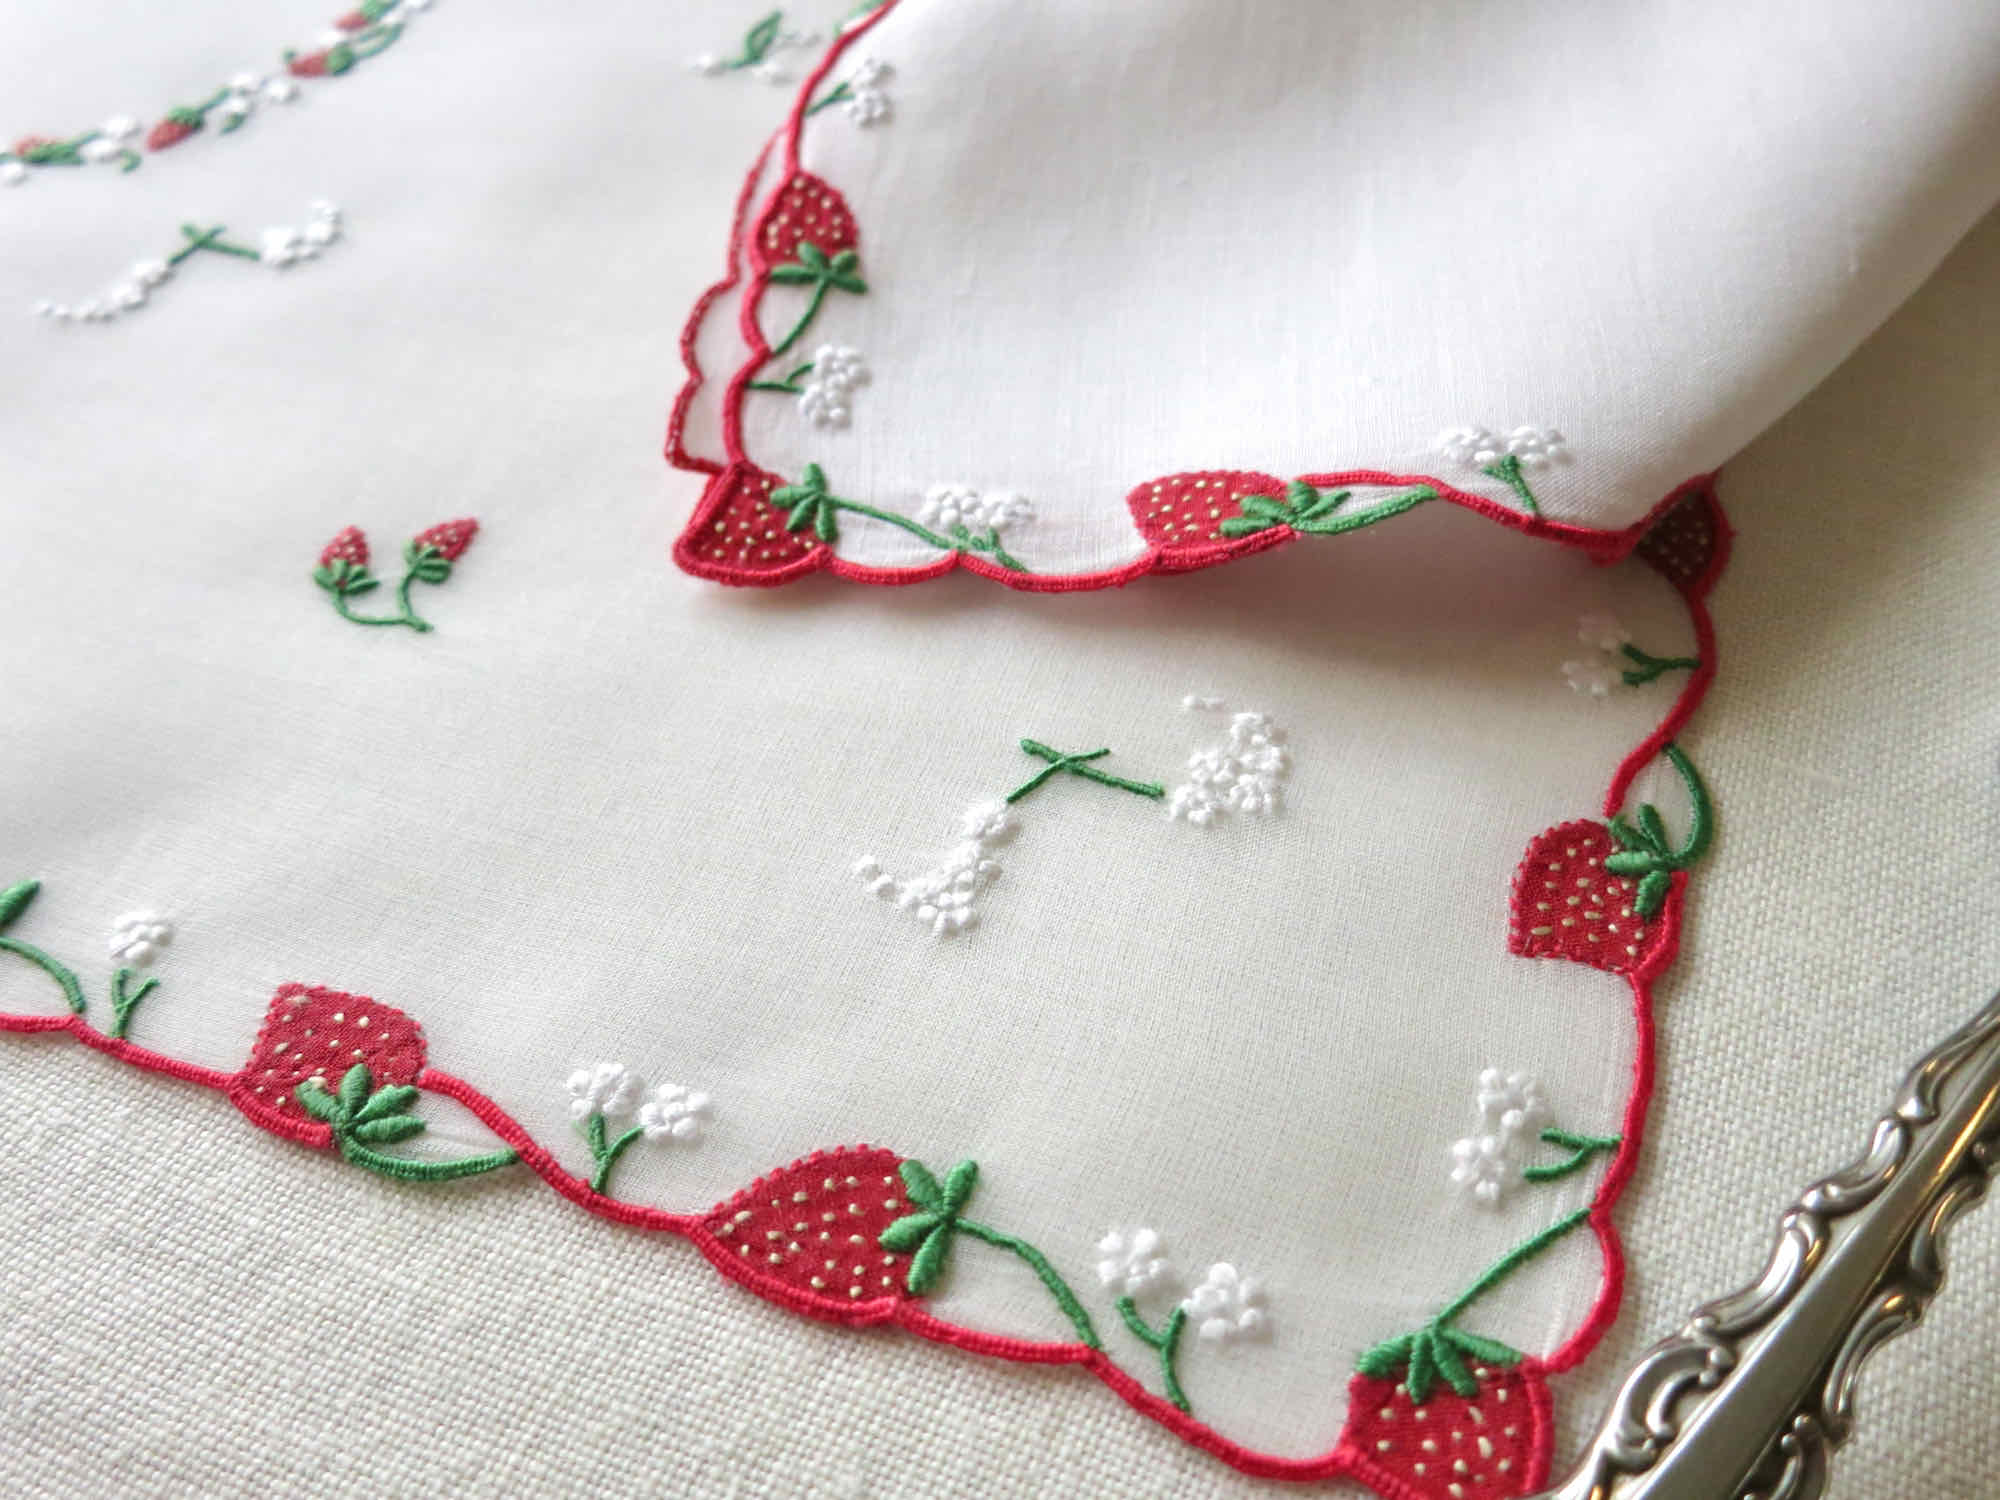 "Strawberry" Marghab Vintage Madeira Embroidered 16pc Placemat Set for 8